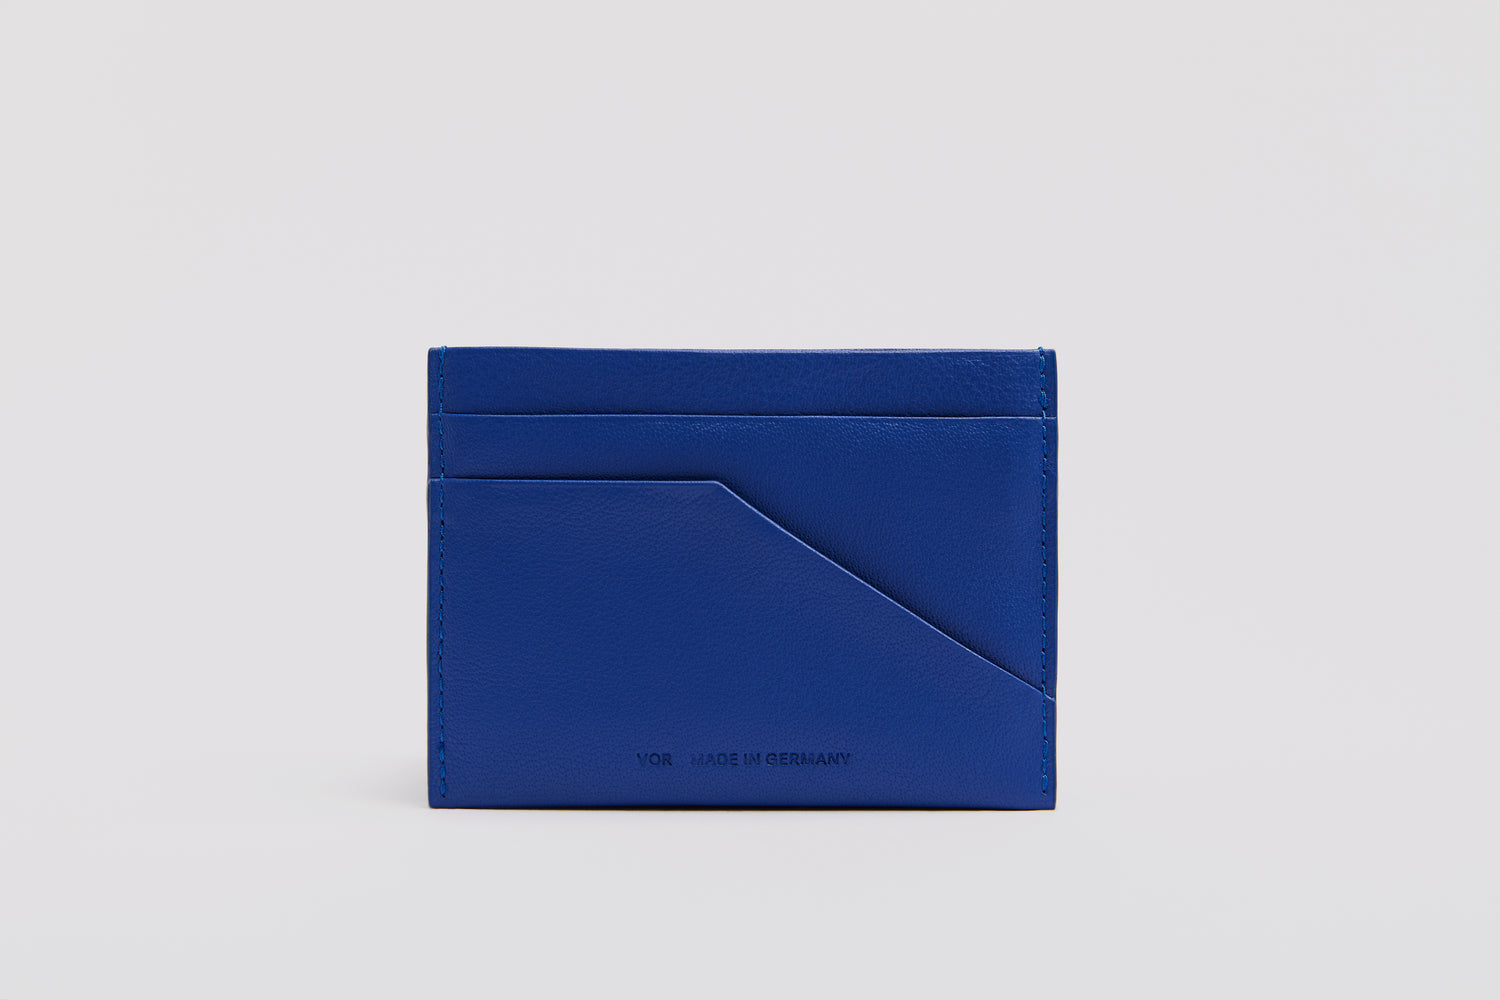 High quality leather cardholder in a vibrant shade of blue.